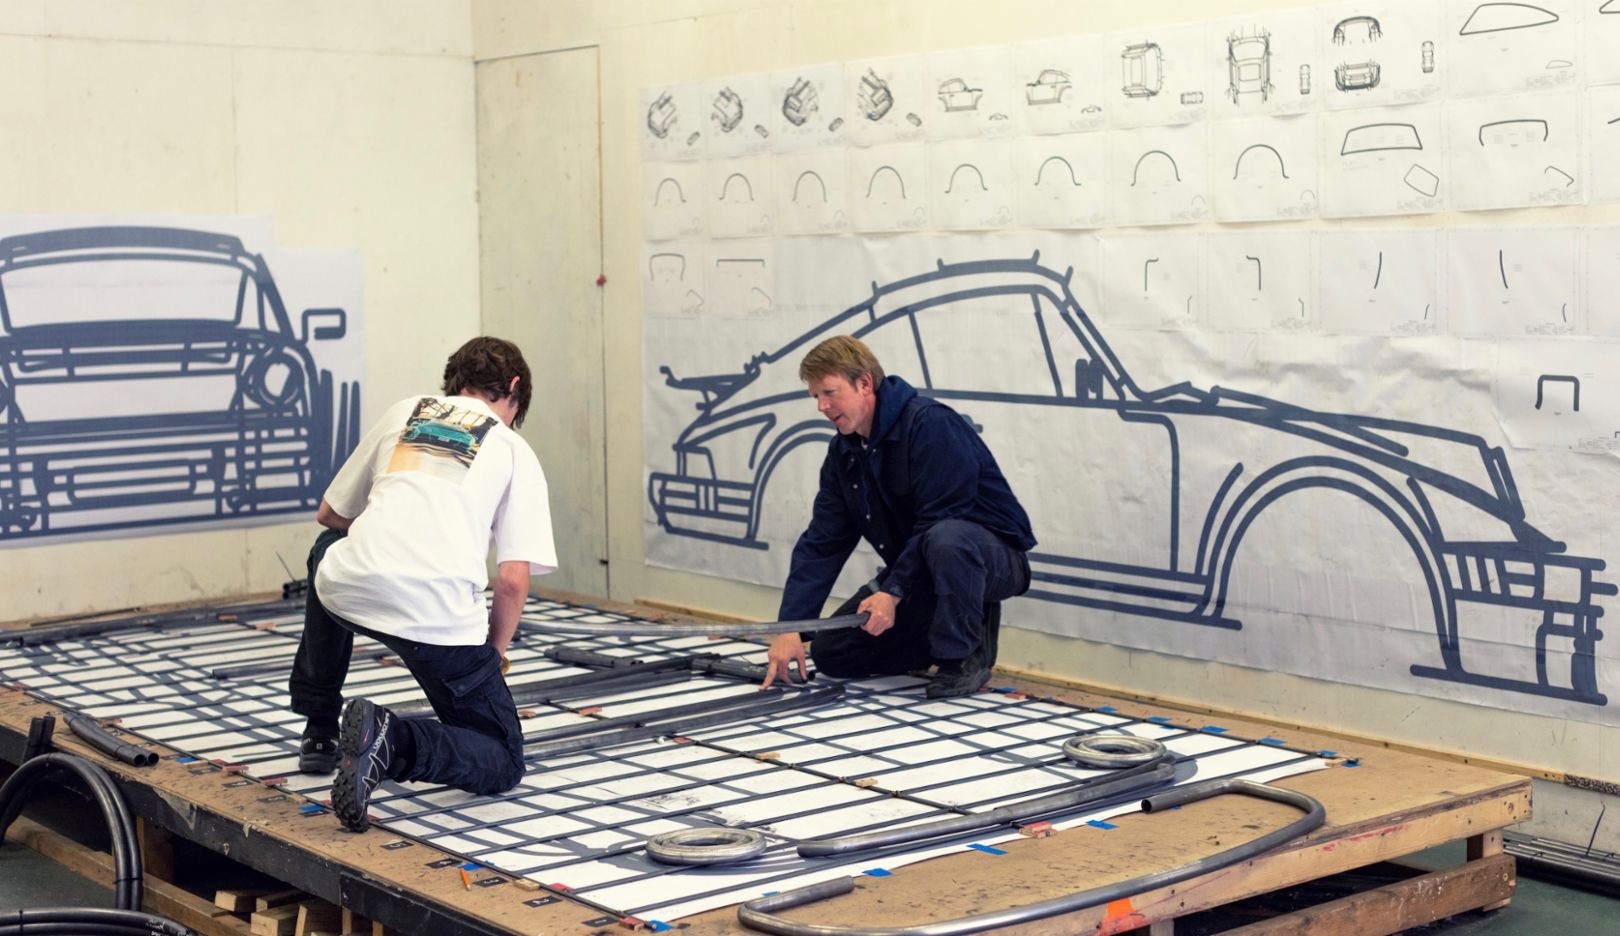 911 Love: Benedict Radcliffe works on his latest creation, a Porsche 934 in 1:1 scale, with assistant Jordan Wilkes-Siddeley at his studio in Shoreditch, East London.